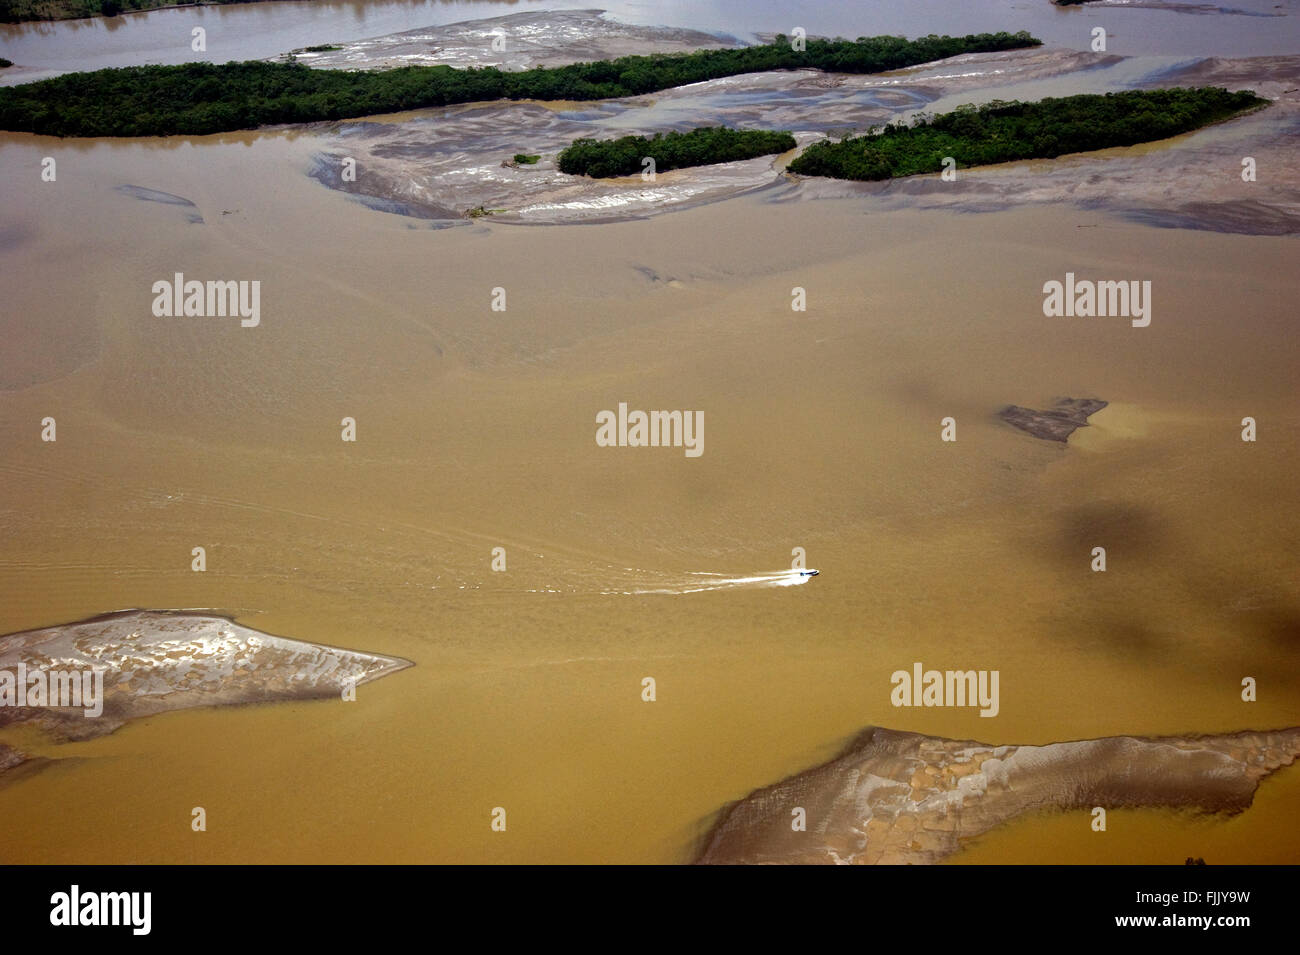 Aerial view of boat on the Amazon river in Ecuador Stock Photo